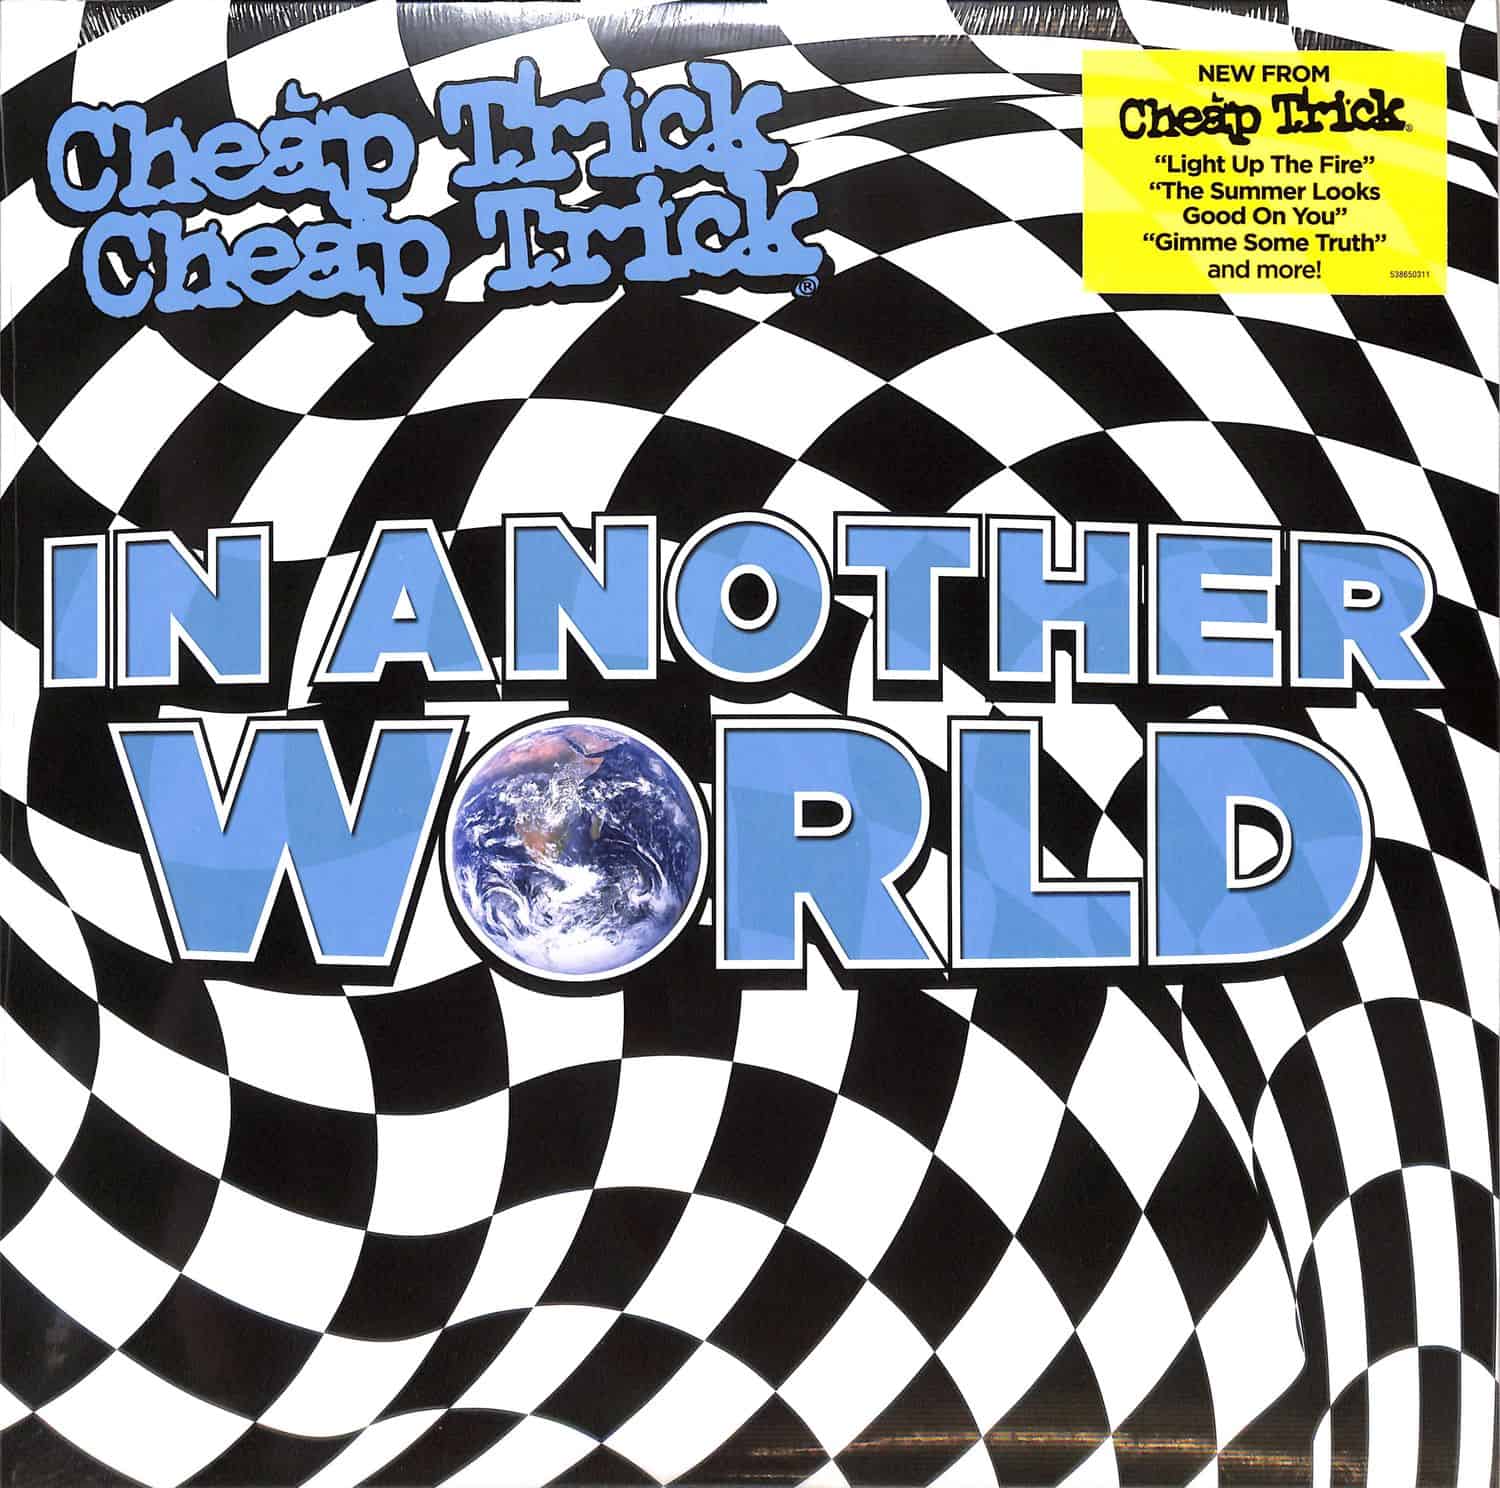 Cheap Trick  - IN ANOTHER WORLD 